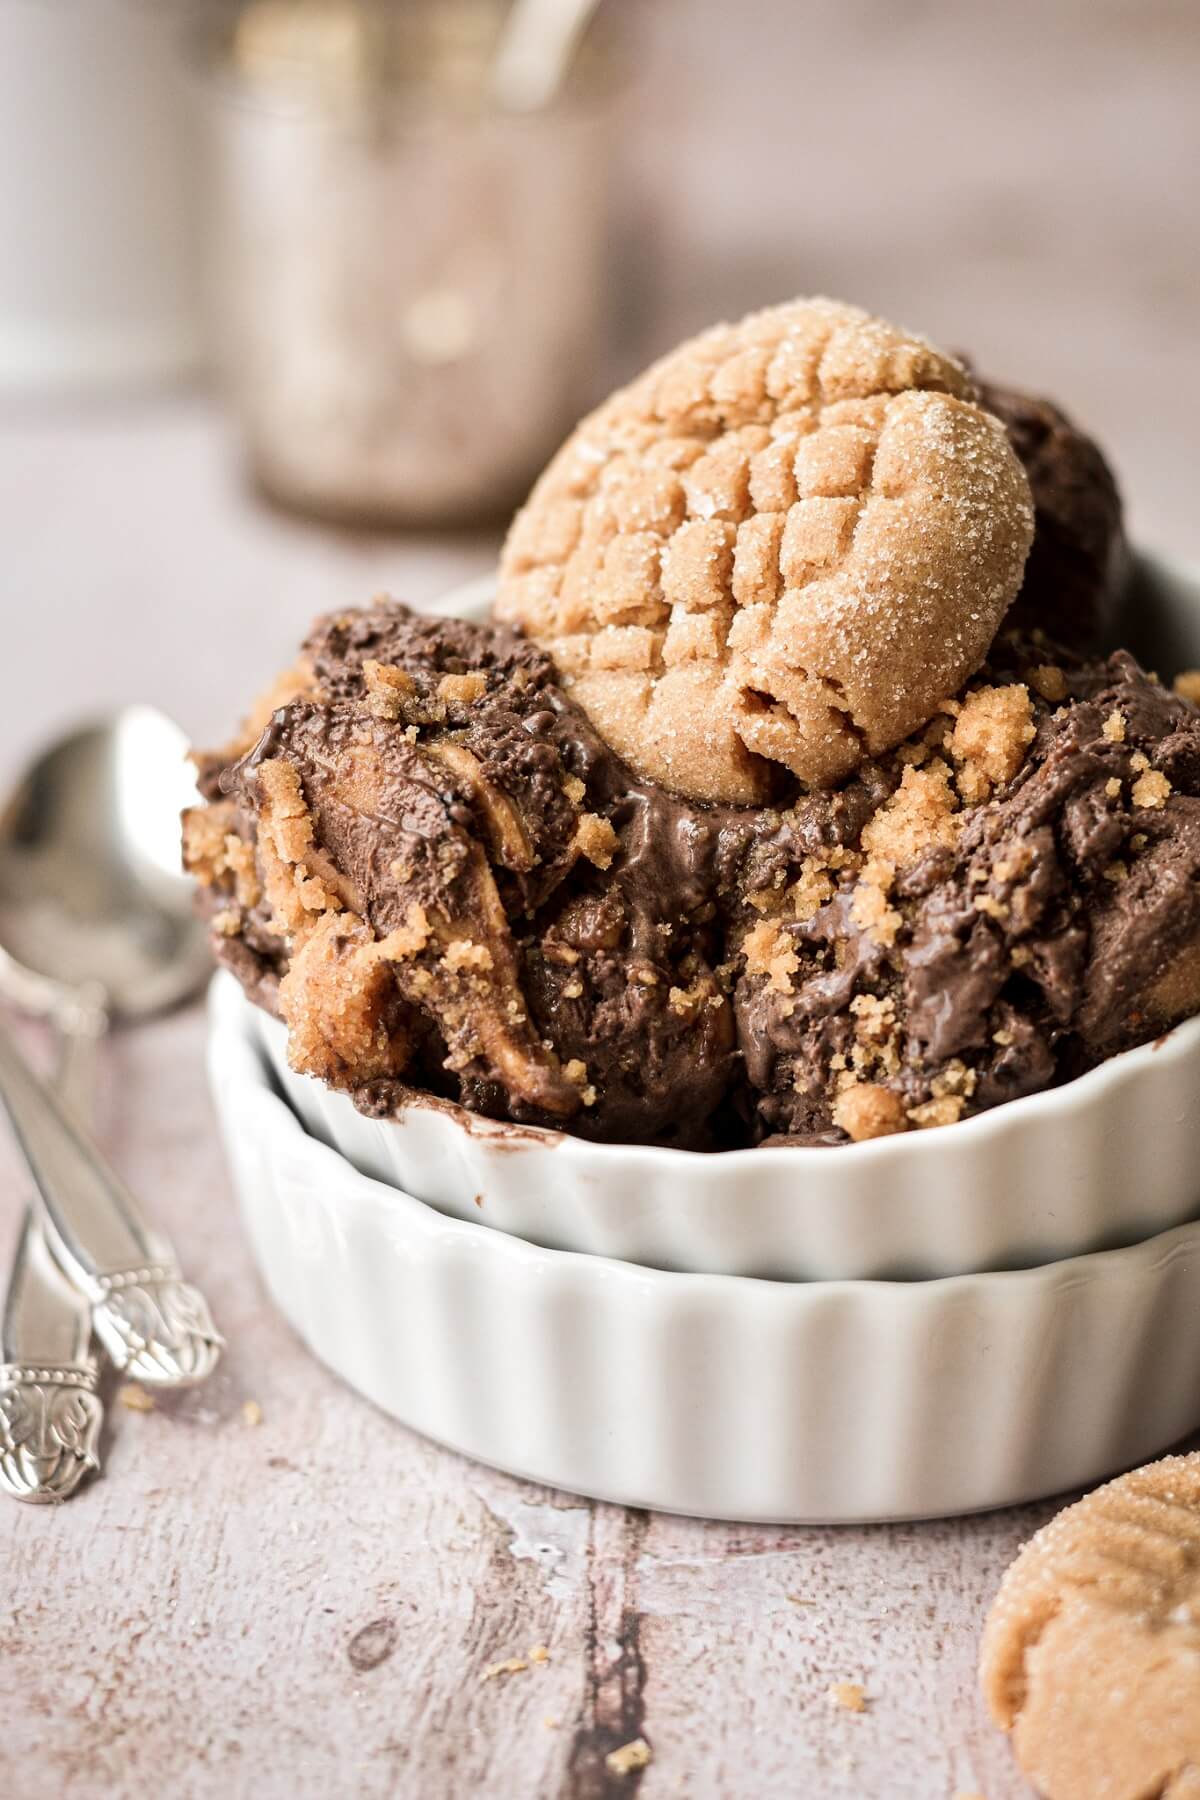 Peanut butter cookie sitting on top of no churn chocolate peanut butter cookie ice cream.